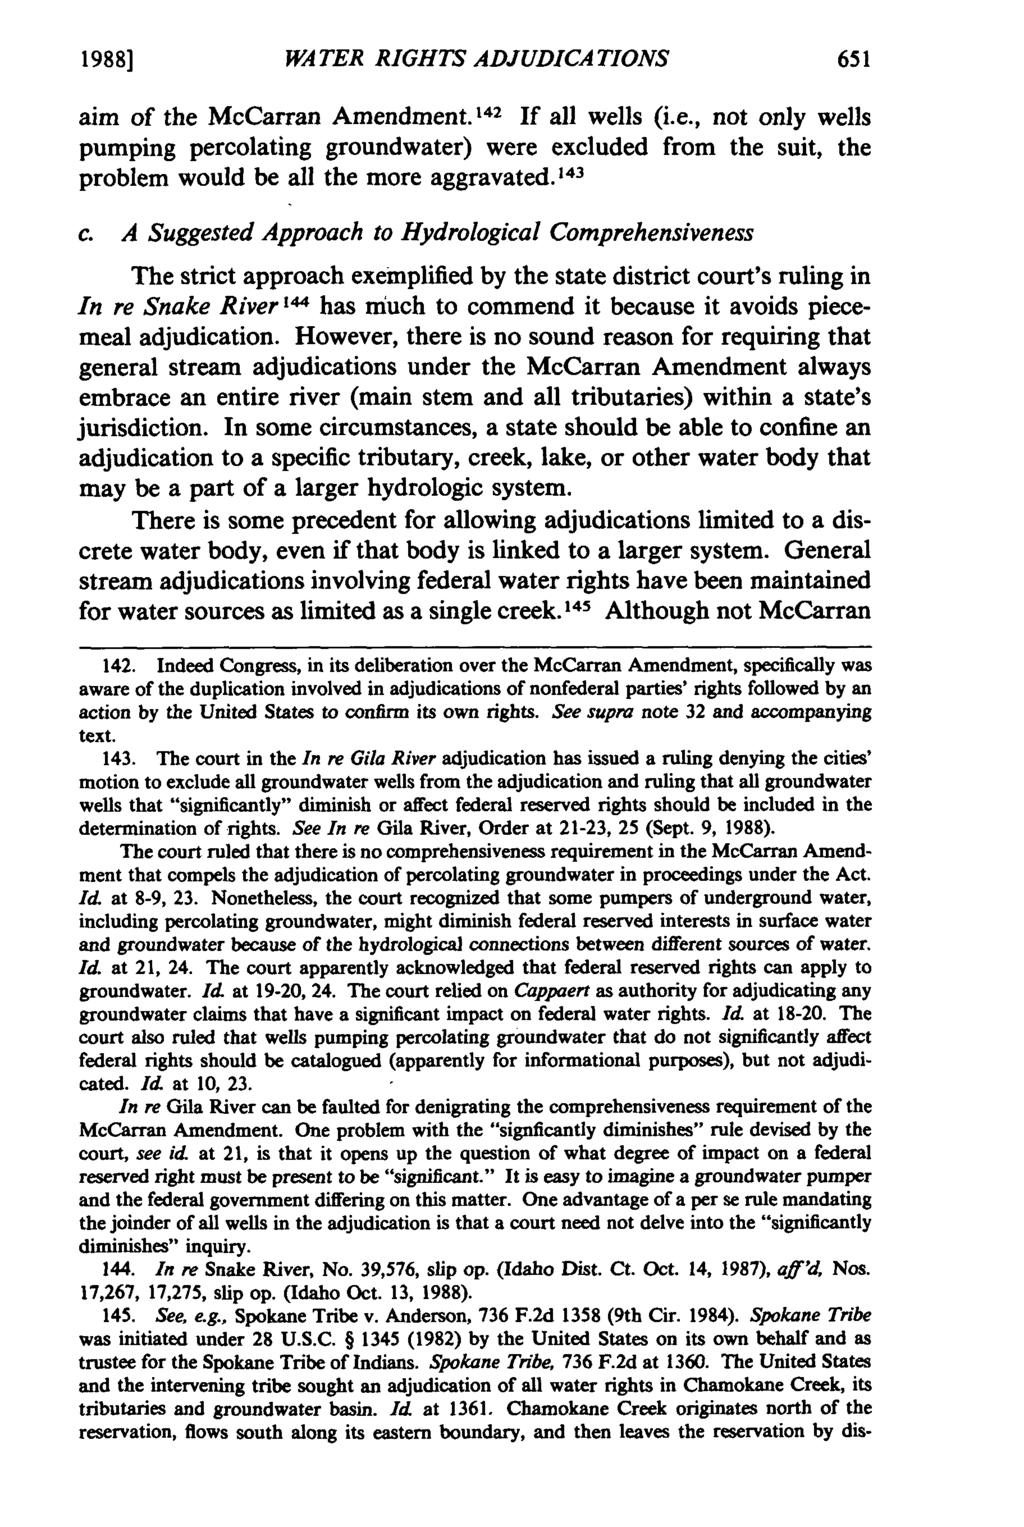 1988] WATER RIGHTS ADJUDICATIONS aim of the McCarran Amendment.1 42 If all wells (i.e., not only wells pumping percolating groundwater) were excluded from the suit, the problem would be all the more aggravated.